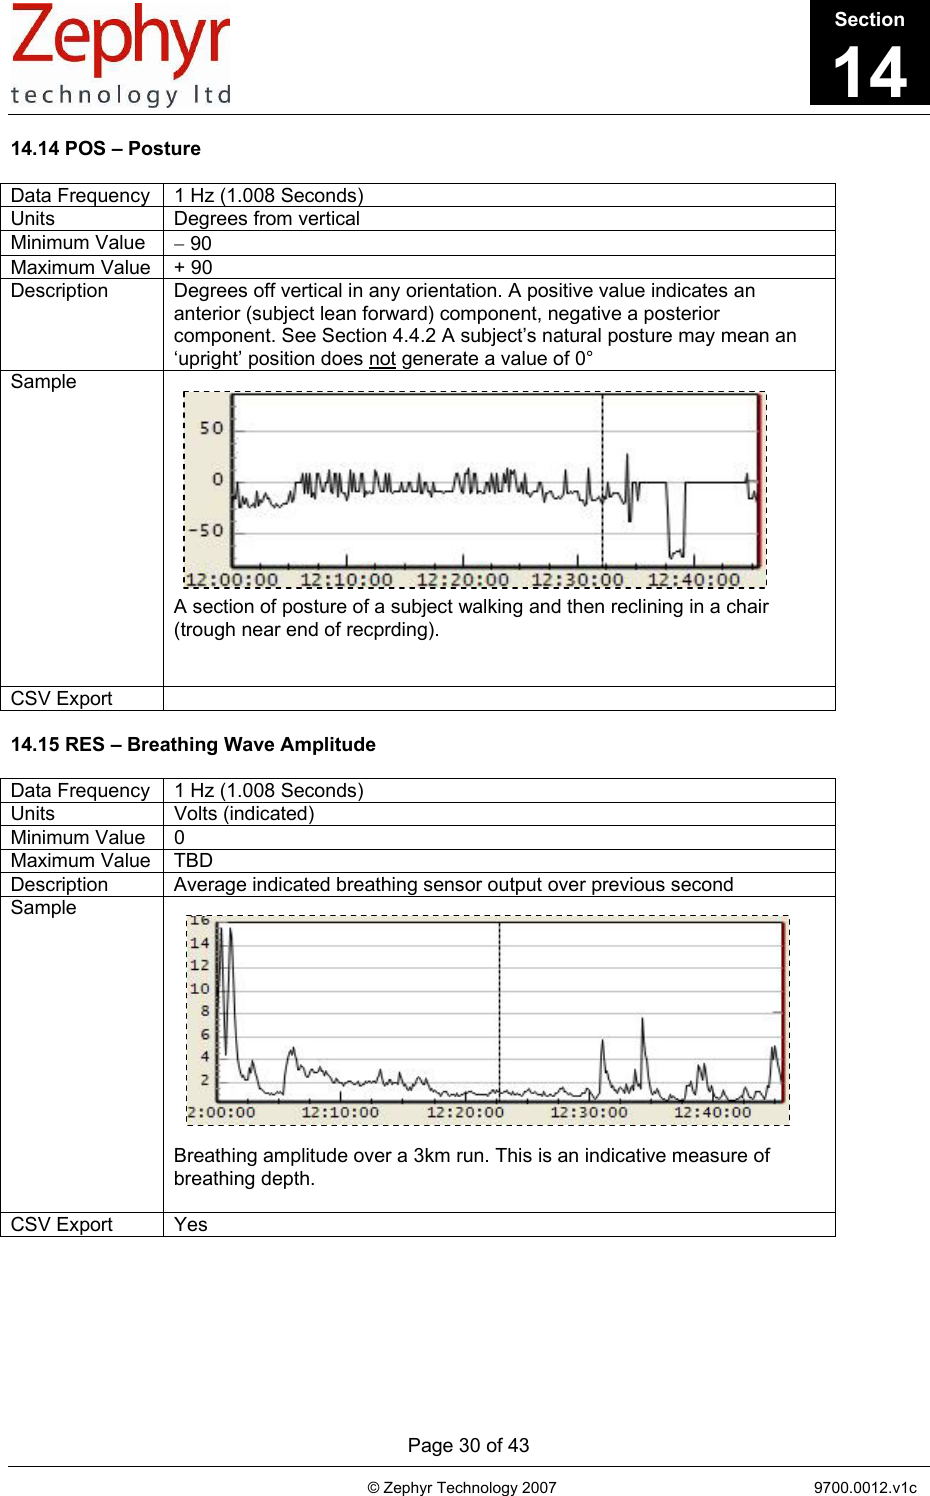       Page 30 of 43                                                                                   © Zephyr Technology 2007                                                           9700.0012.v1c                                         14.14 POS – Posture   Data Frequency  1 Hz (1.008 Seconds) Units  Degrees from vertical Minimum Value  − 90 Maximum Value  + 90 Description  Degrees off vertical in any orientation. A positive value indicates an anterior (subject lean forward) component, negative a posterior component. See Section 4.4.2 A subject’s natural posture may mean an ‘upright’ position does not generate a value of 0° Sample            A section of posture of a subject walking and then reclining in a chair (trough near end of recprding).   CSV Export    14.15 RES – Breathing Wave Amplitude  Data Frequency  1 Hz (1.008 Seconds) Units Volts (indicated) Minimum Value  0 Maximum Value  TBD Description  Average indicated breathing sensor output over previous second Sample             Breathing amplitude over a 3km run. This is an indicative measure of breathing depth.  CSV Export  Yes Section14